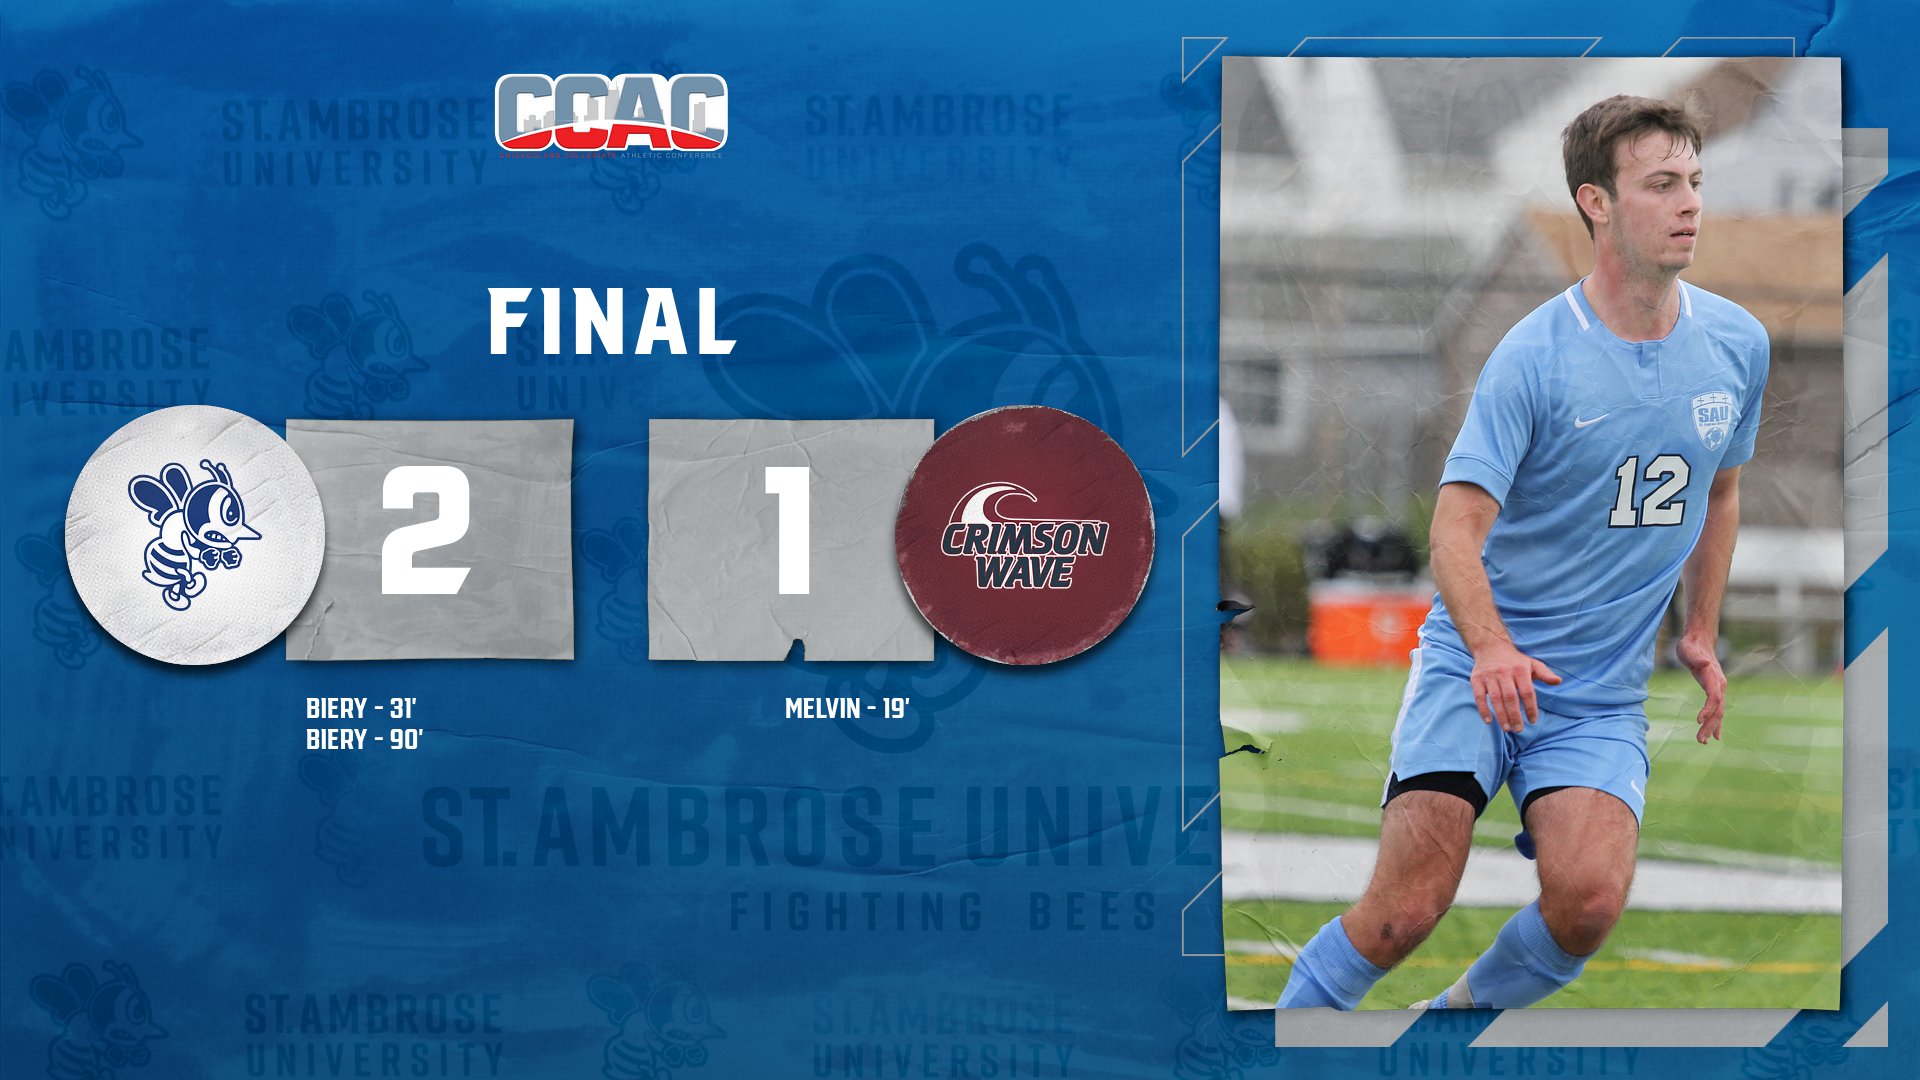 Biery's late goal gives SAU first conference victory